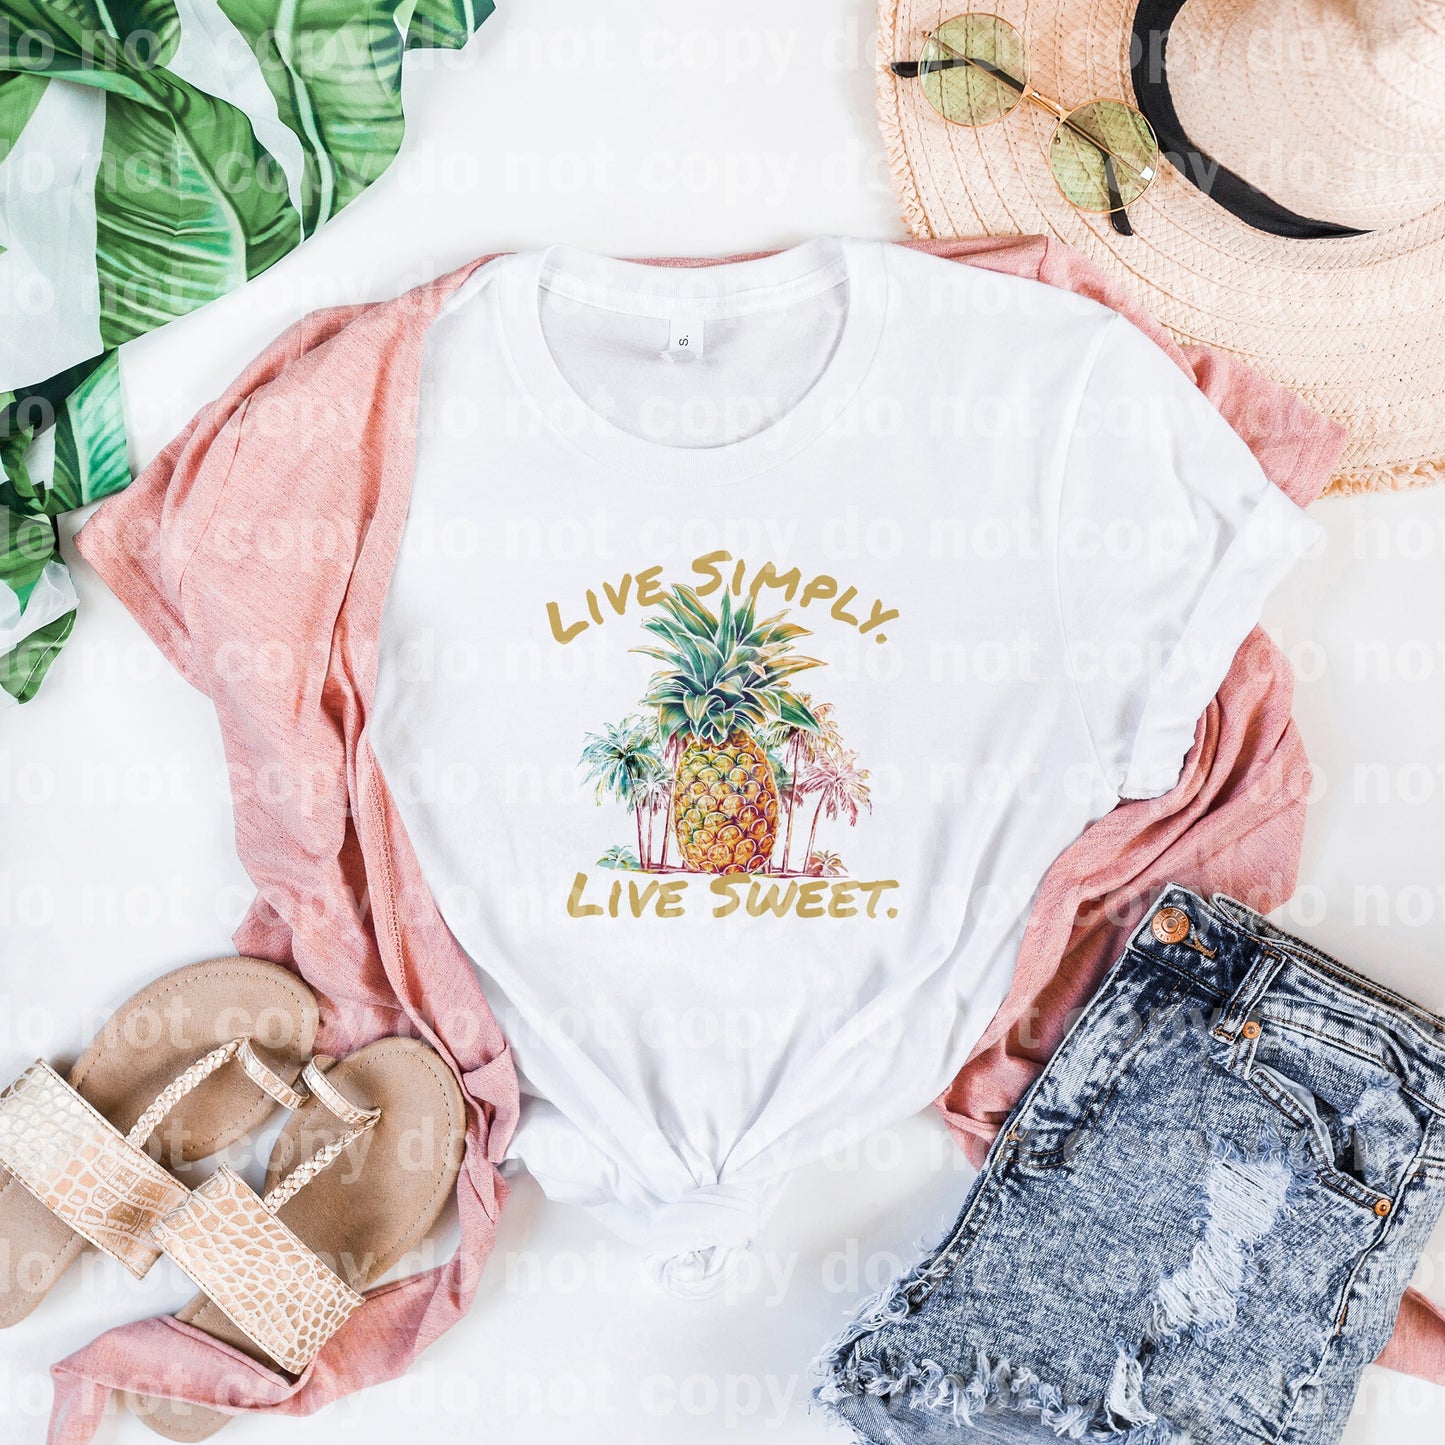 Live Simply Live Sweet with Pocket Option Dream Print or Sublimation Print